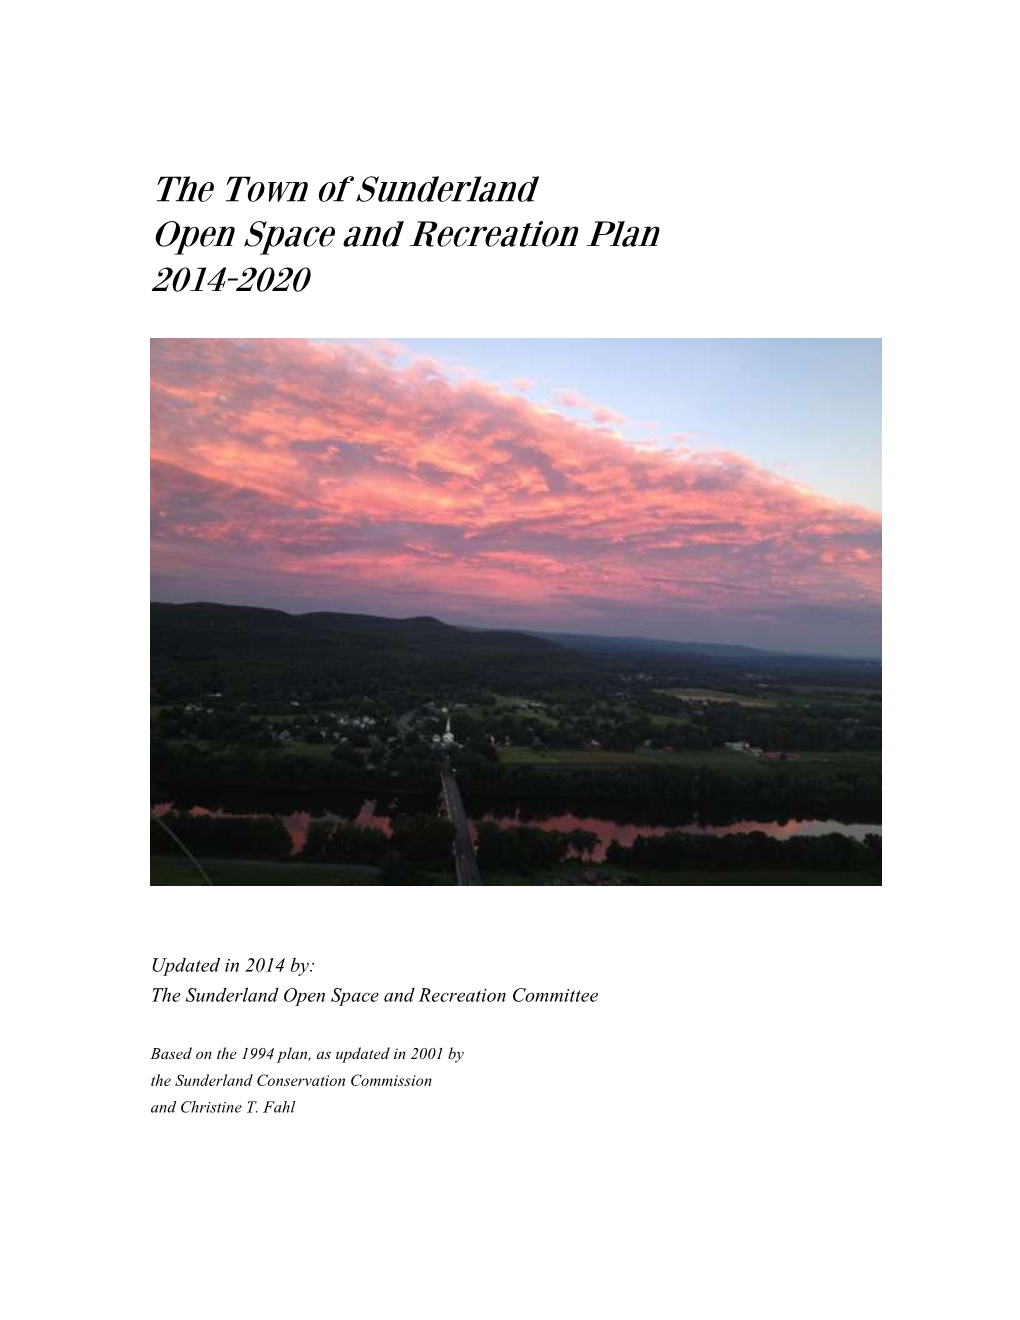 The Town of Sunderland Open Space and Recreation Plan 2014-2020